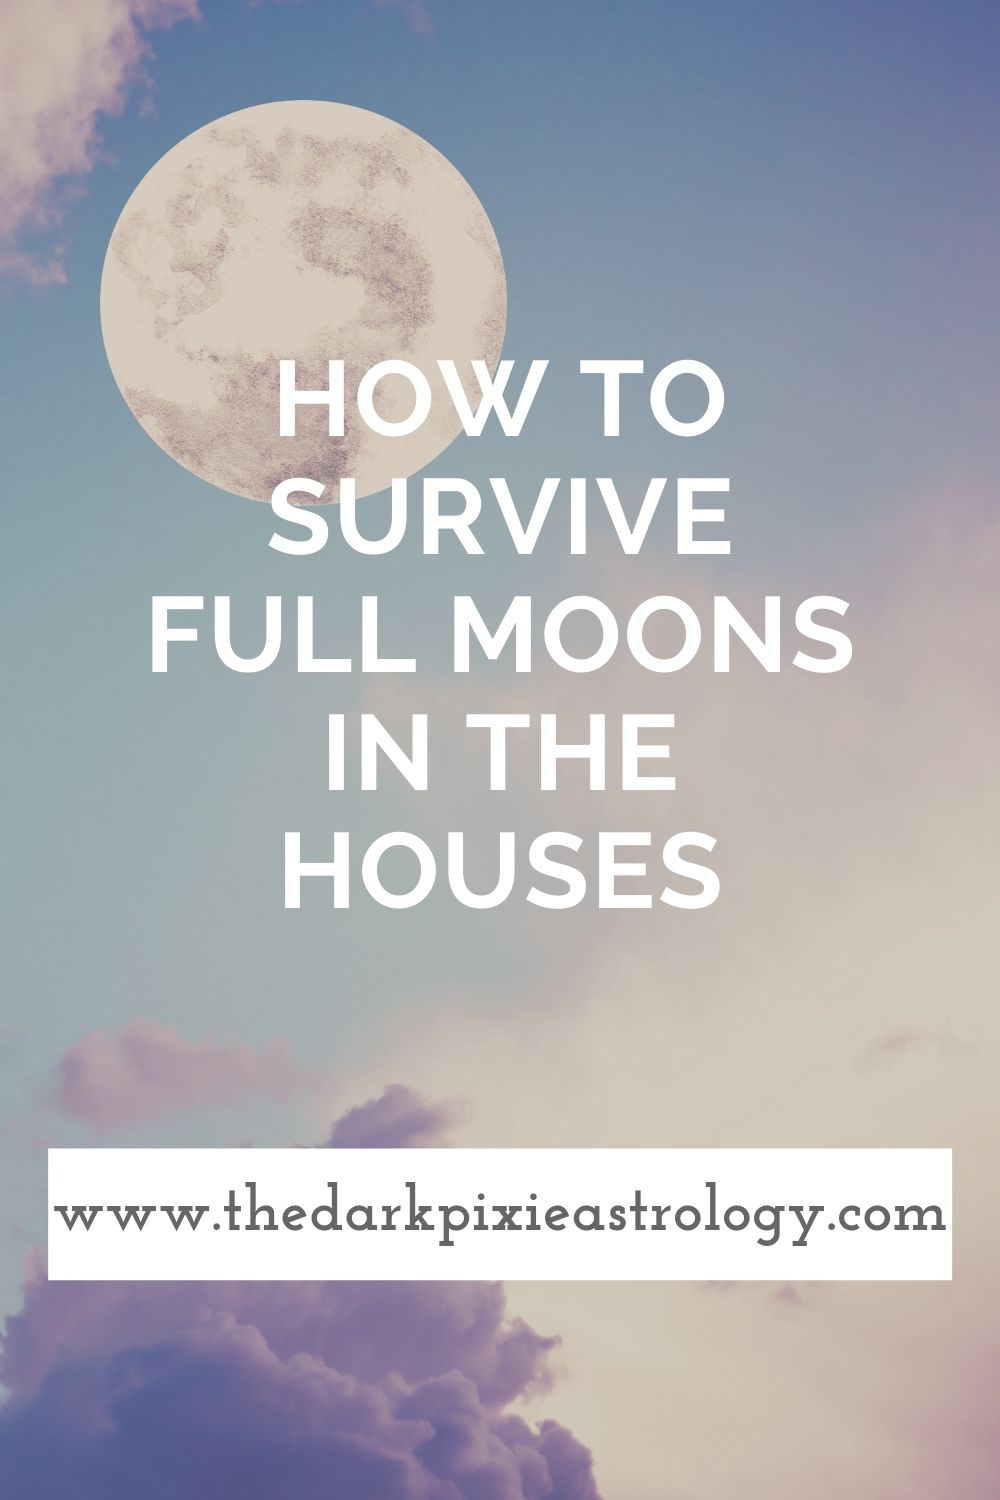 How to Survive Full Moons in the Houses - The Dark Pixie Astrology